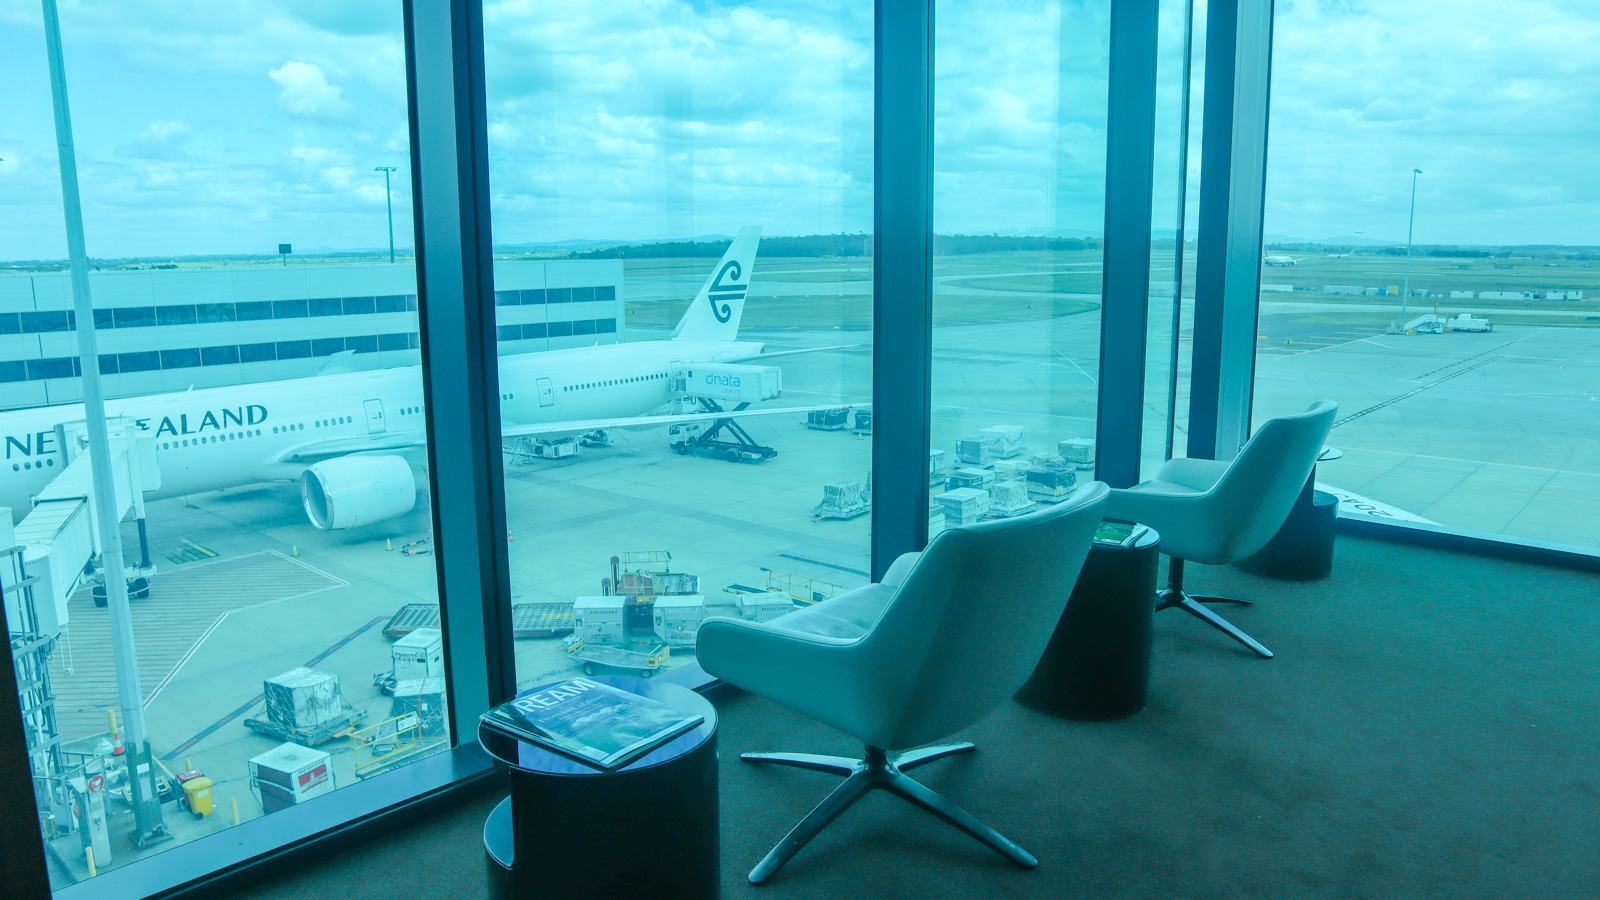 Seats overlooking tarmac at Melbourne Airport